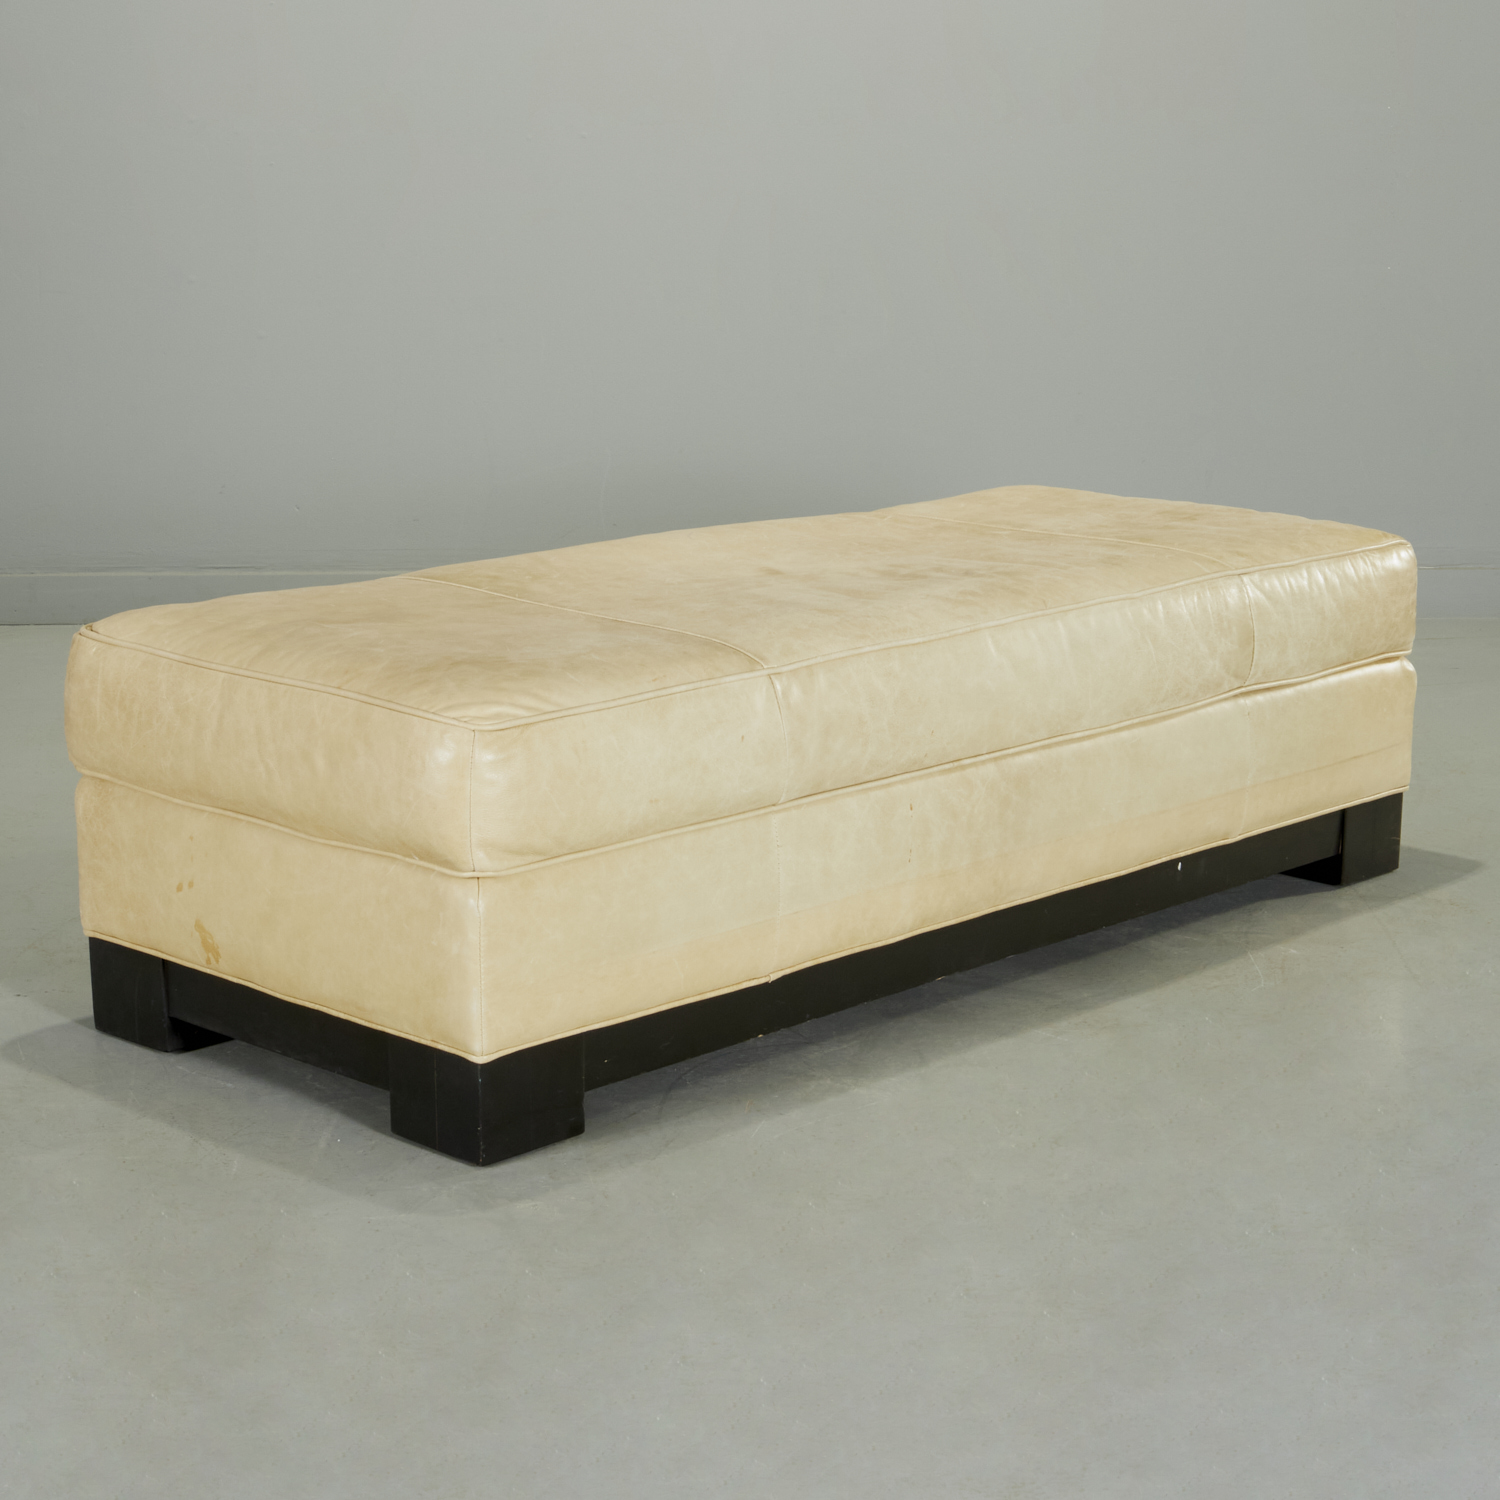 CRATE & BARREL 'ANGELO' LEATHER